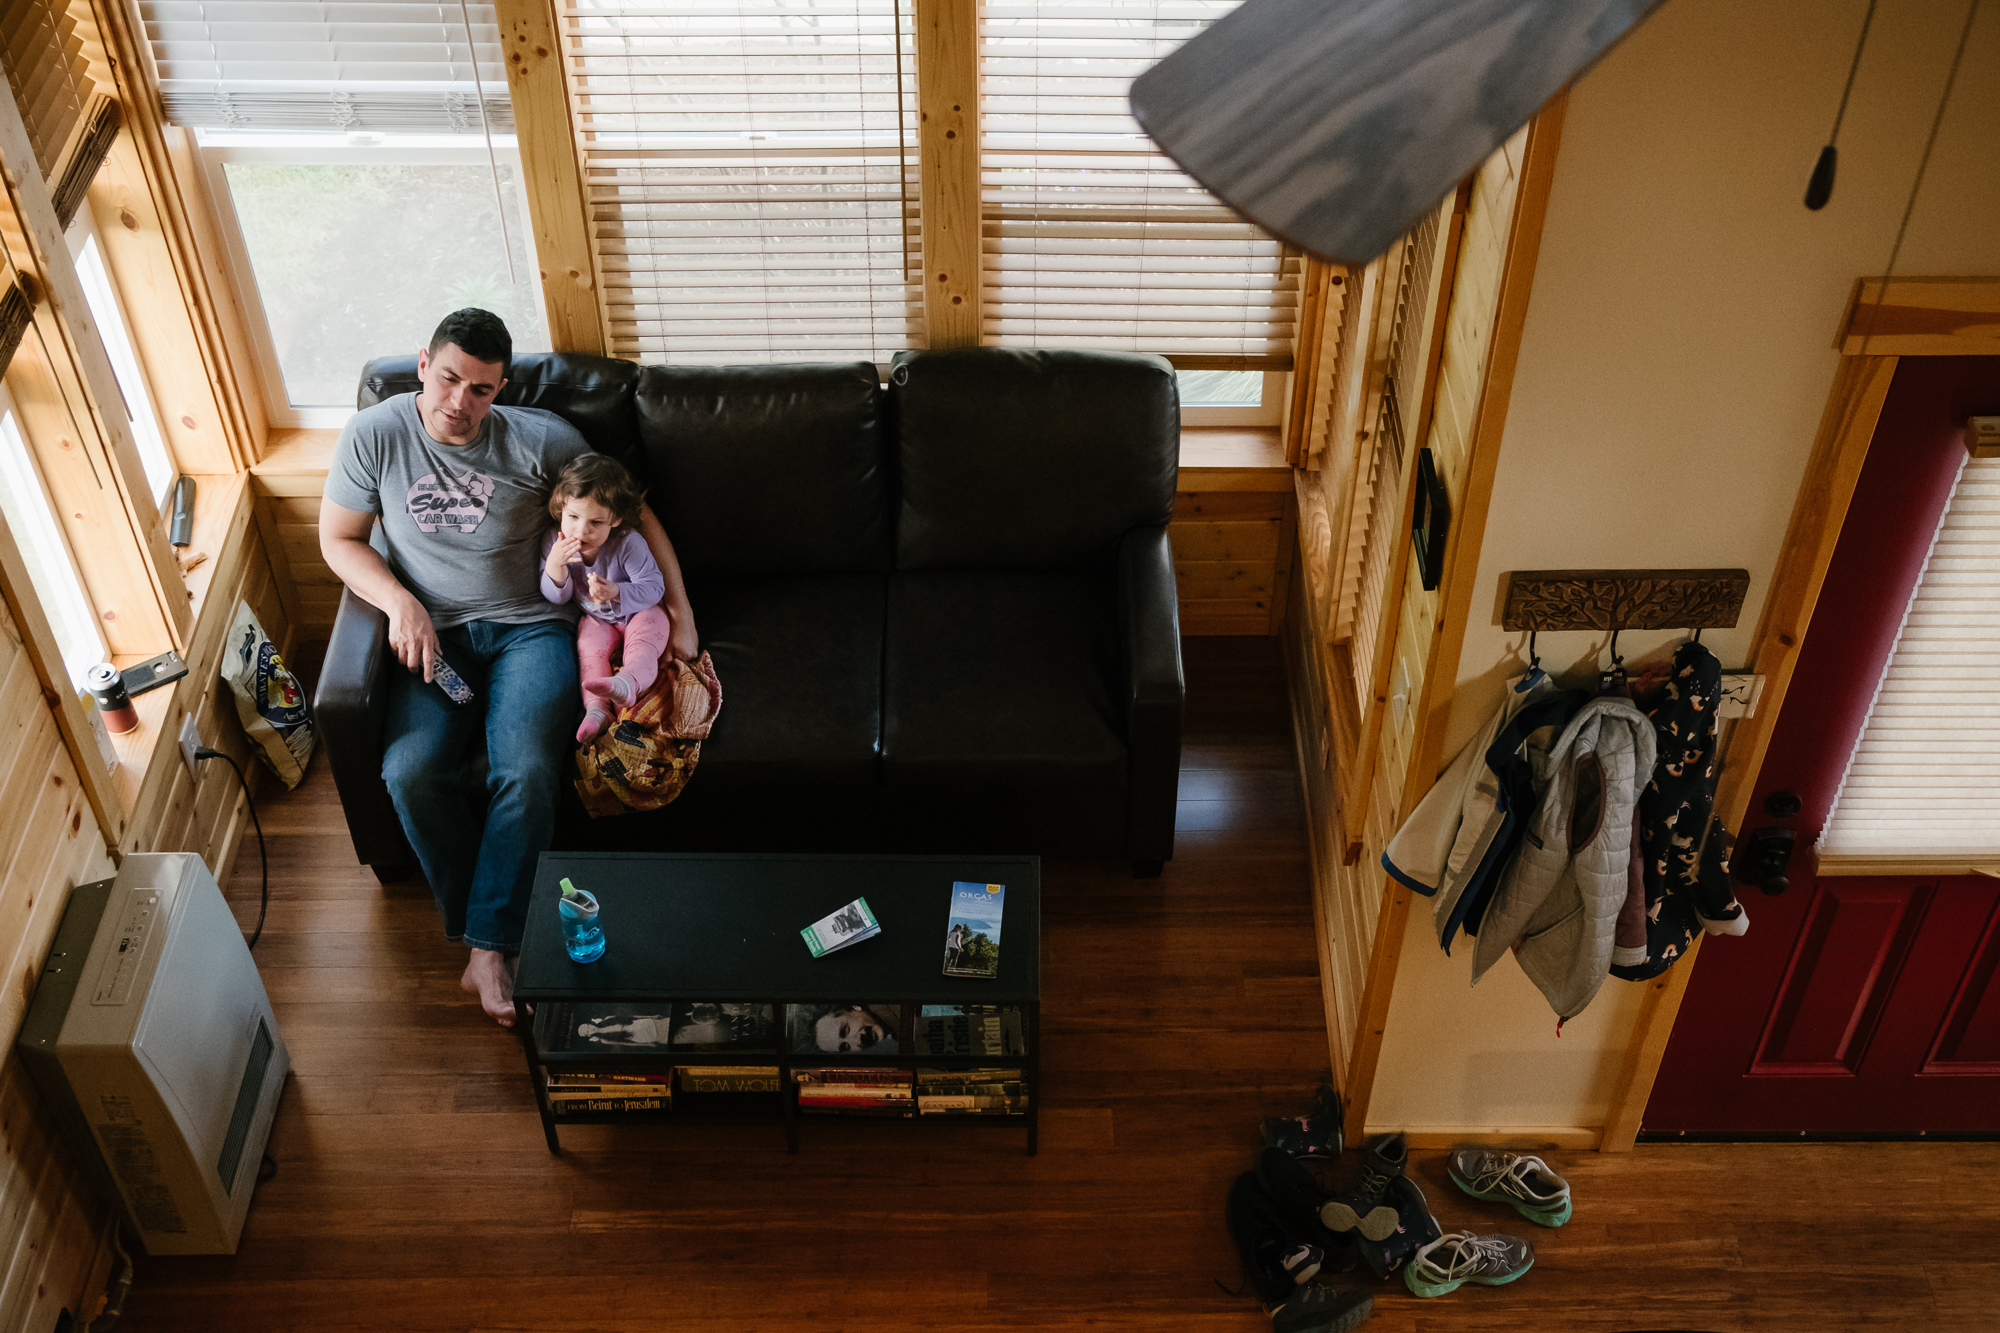 father and daughter watch TV on couch - documentary family photography